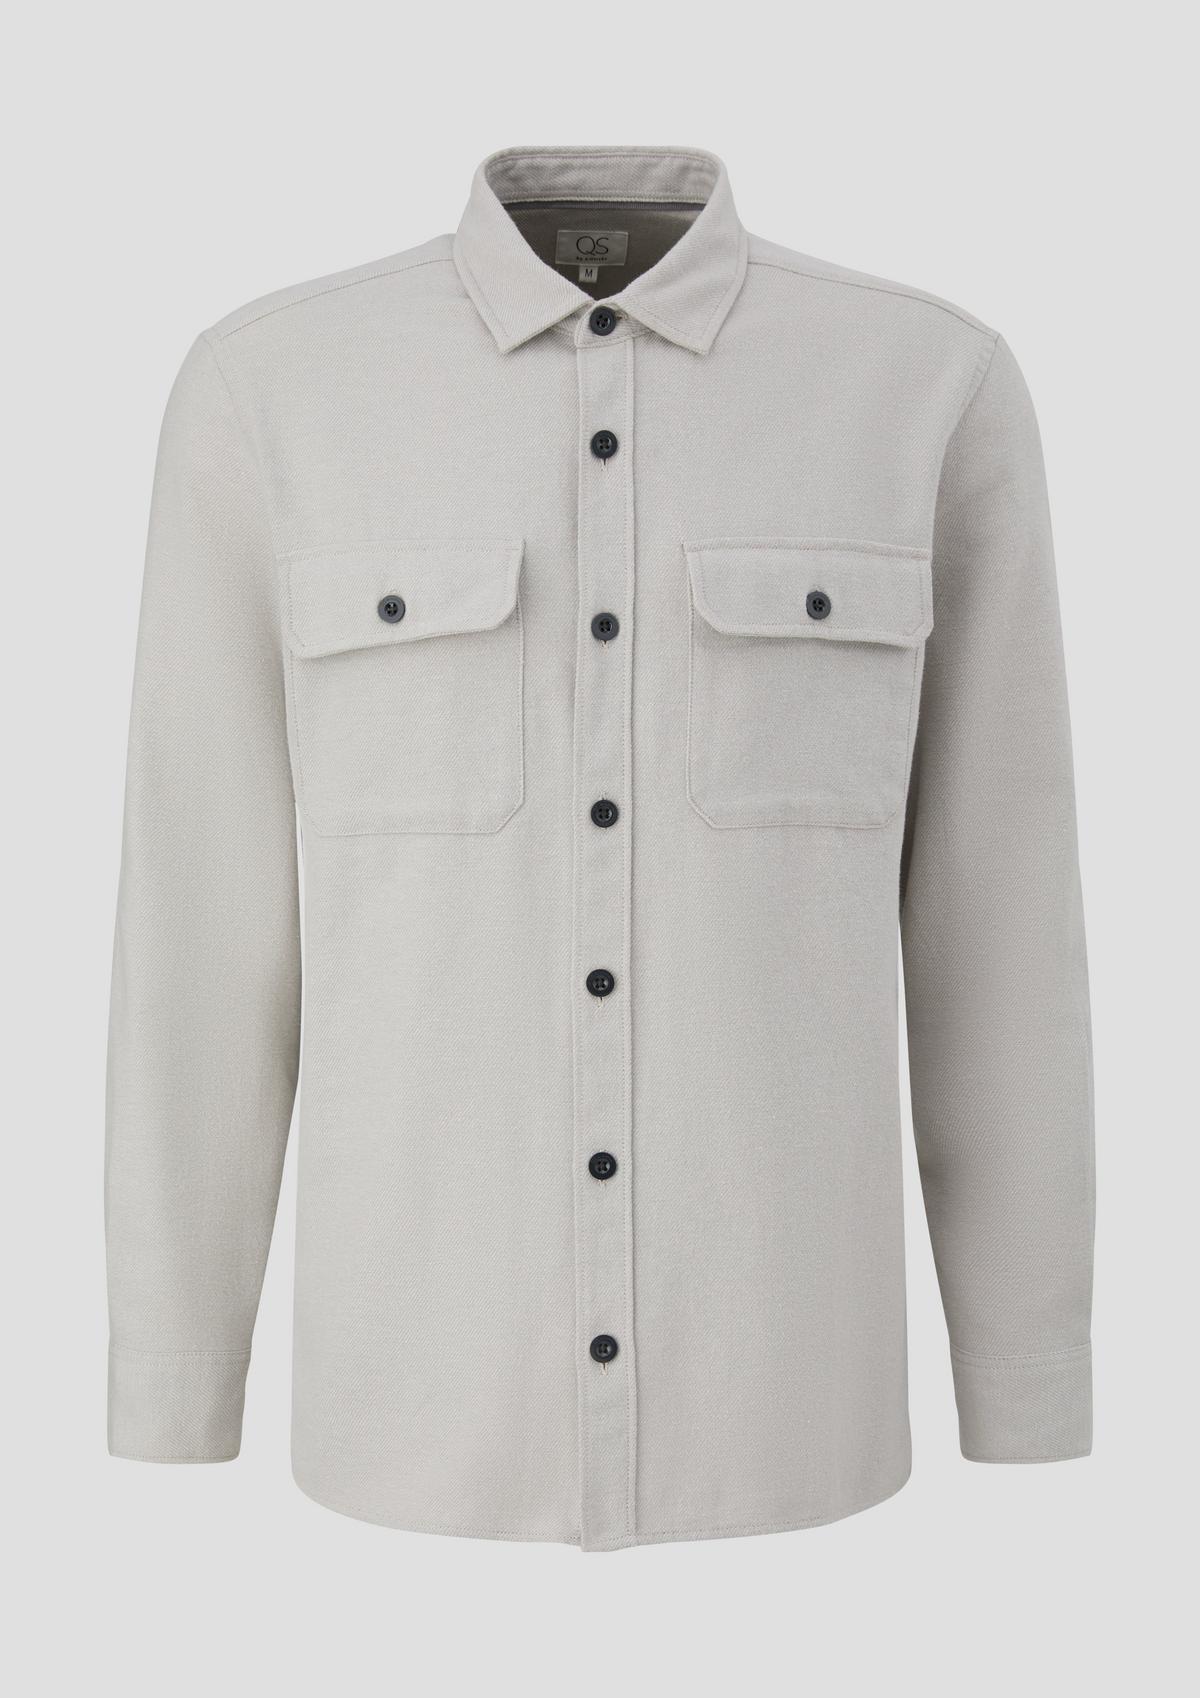 s.Oliver Shirt made of pure cotton